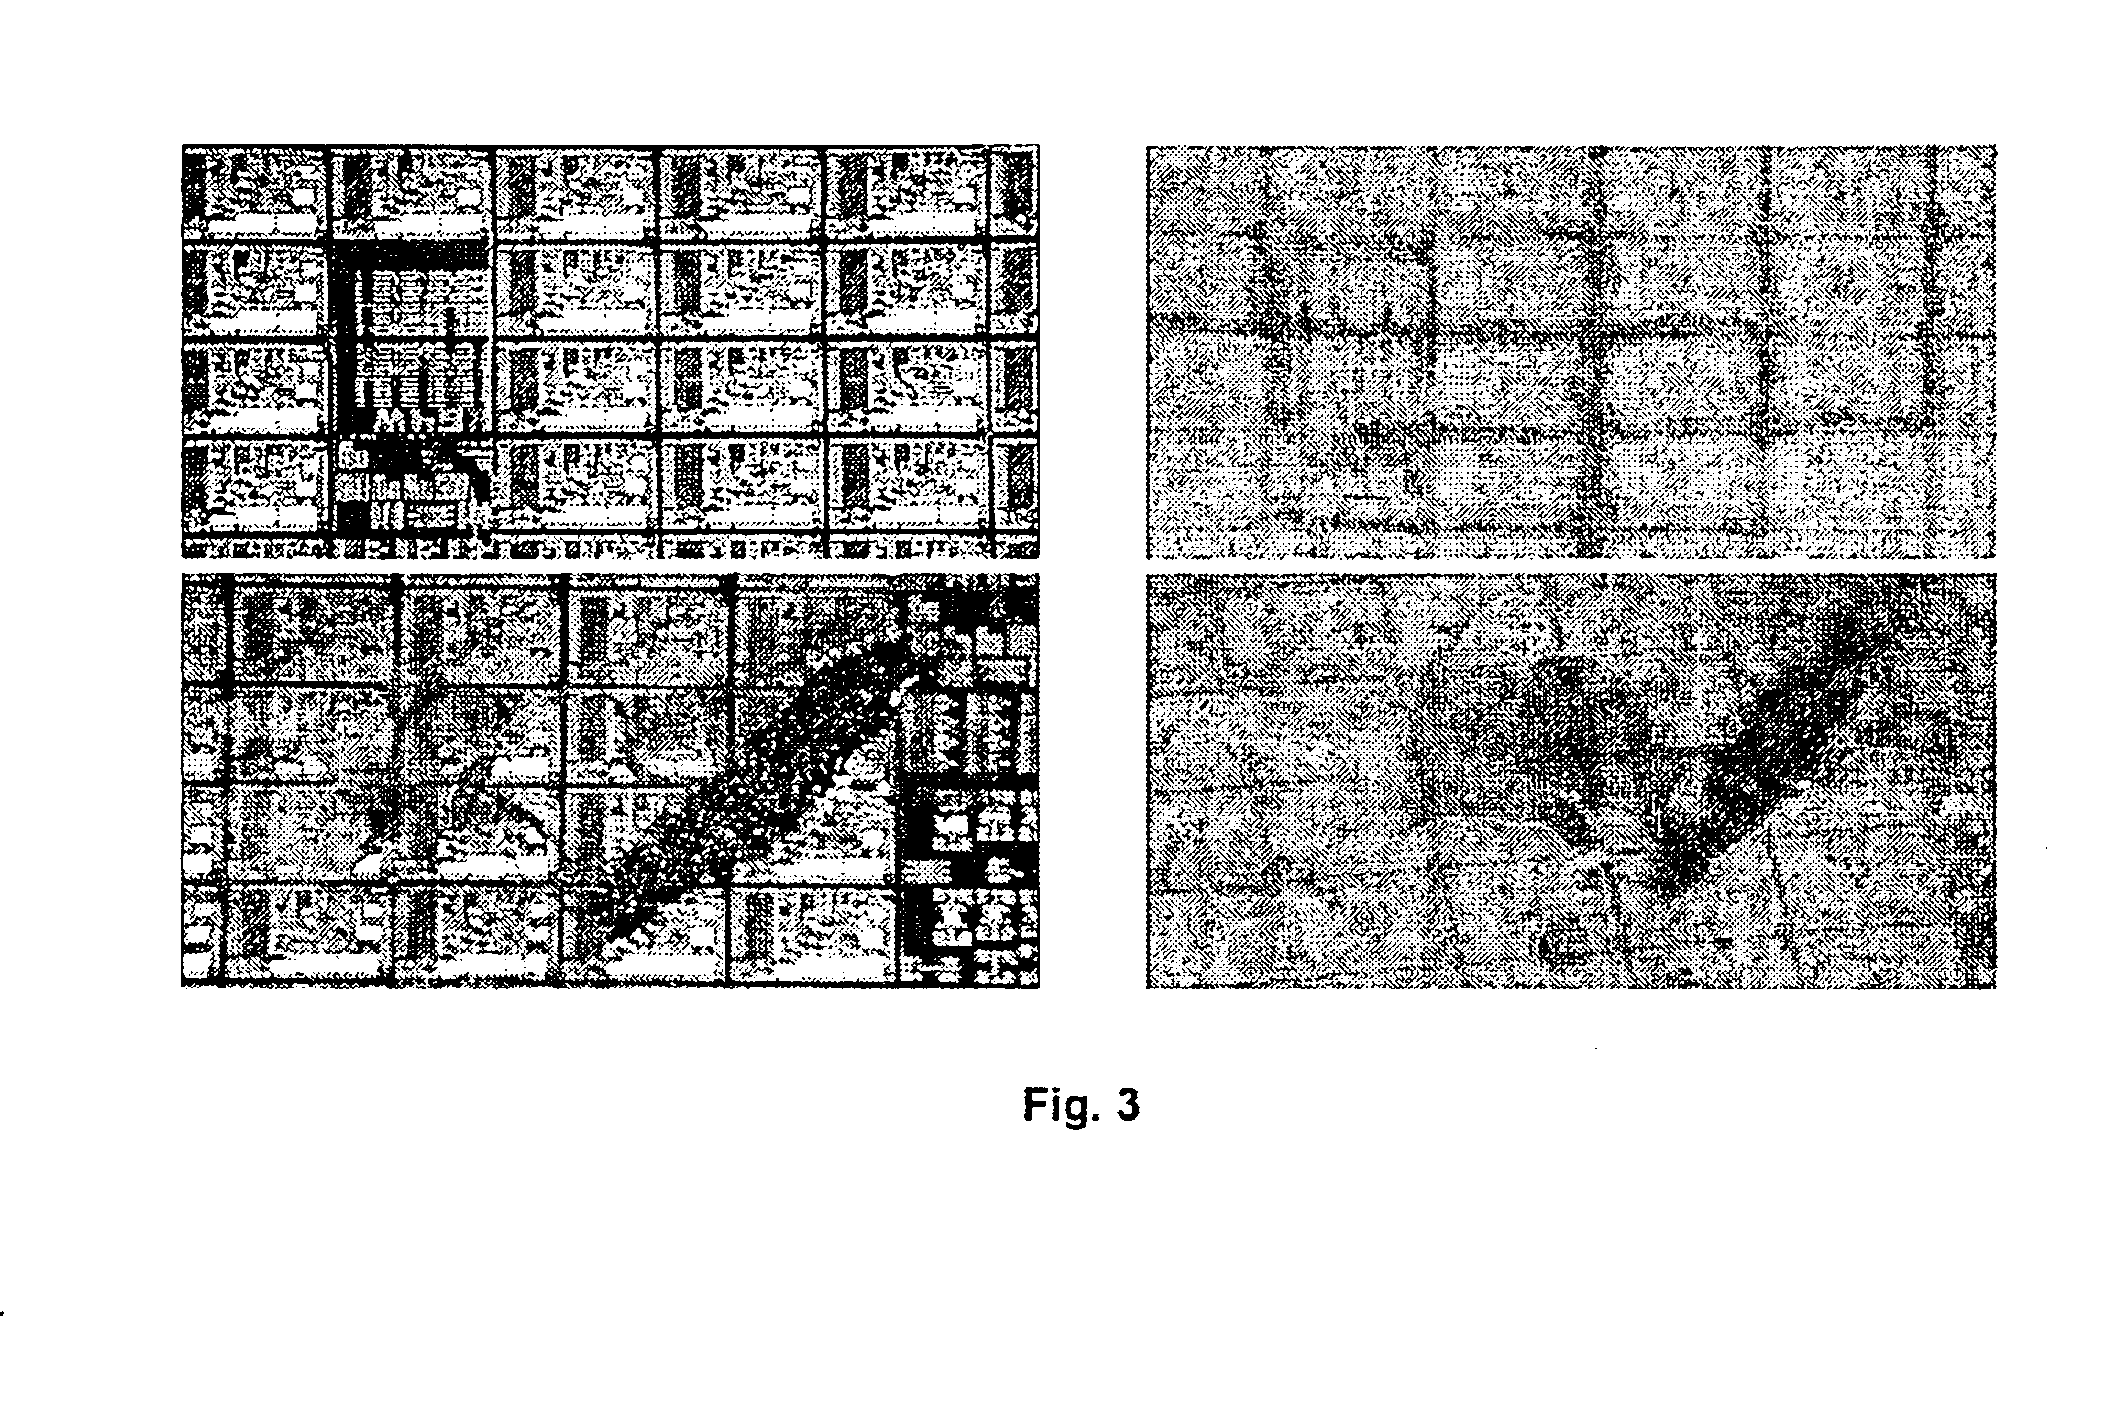 Spin-on adhesive for temporary wafer coating and mounting to support wafer thinning and backside processing